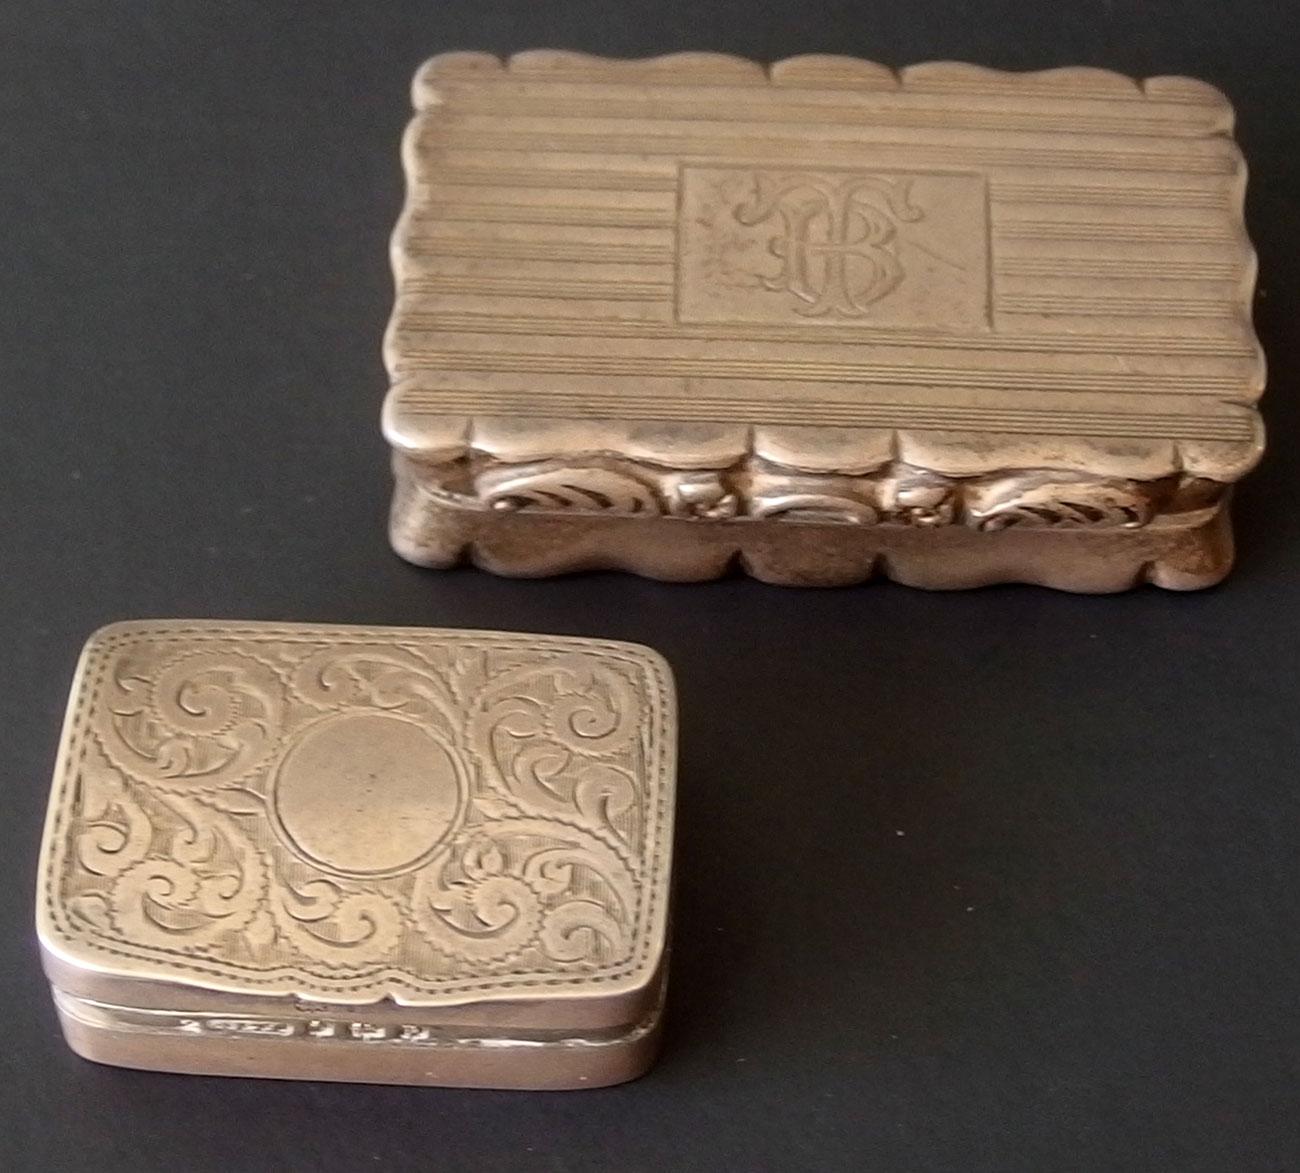 19TH CENTURY ENGLISH STERLING SNUFF BOXES (2)